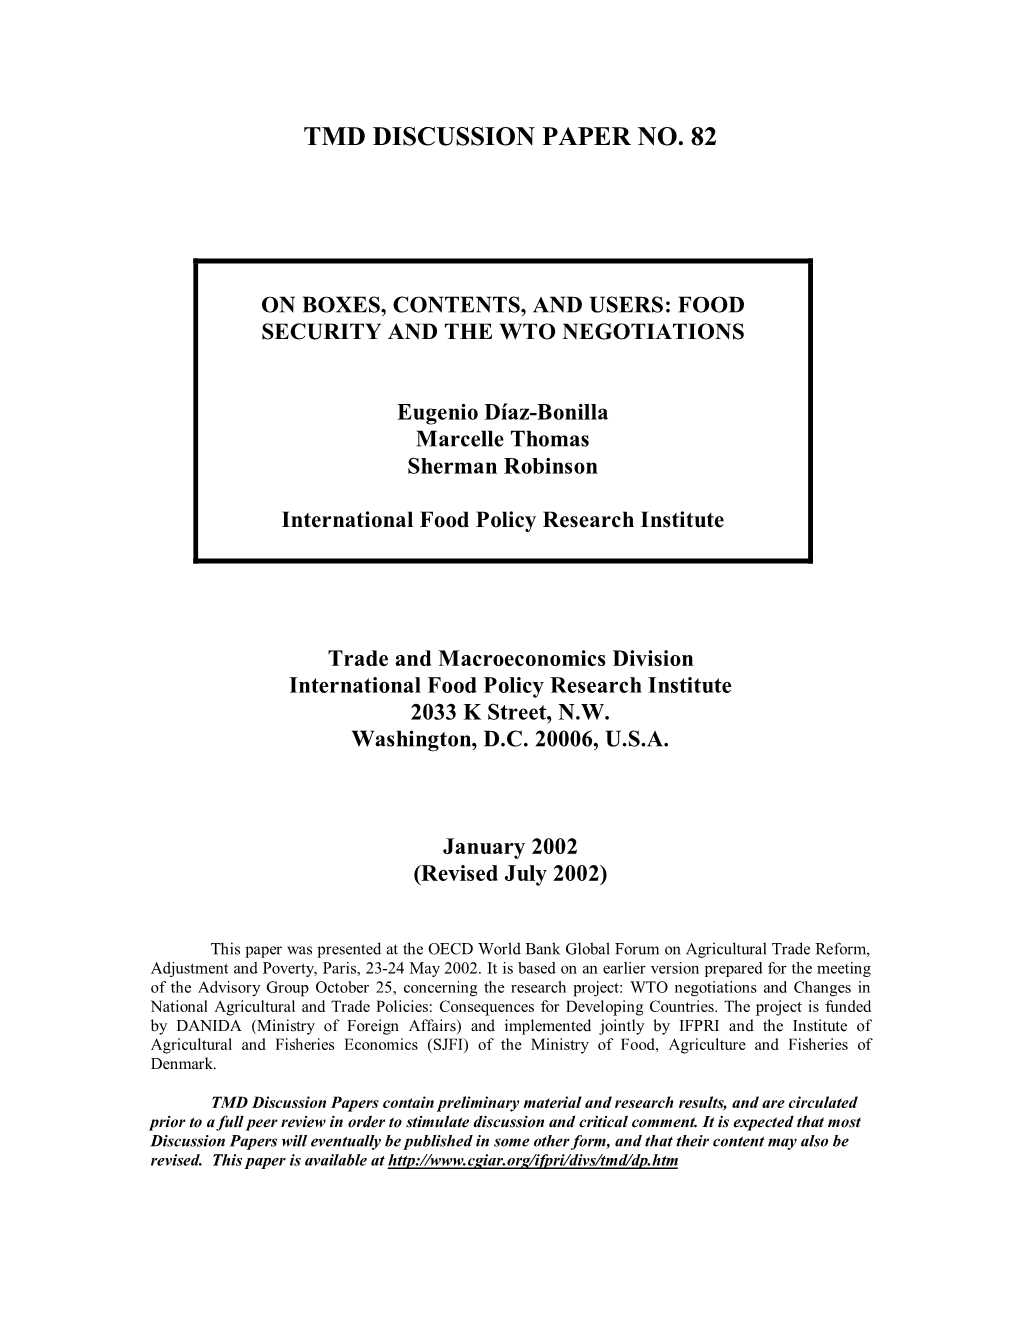 Food Security and the Wto Negotiations